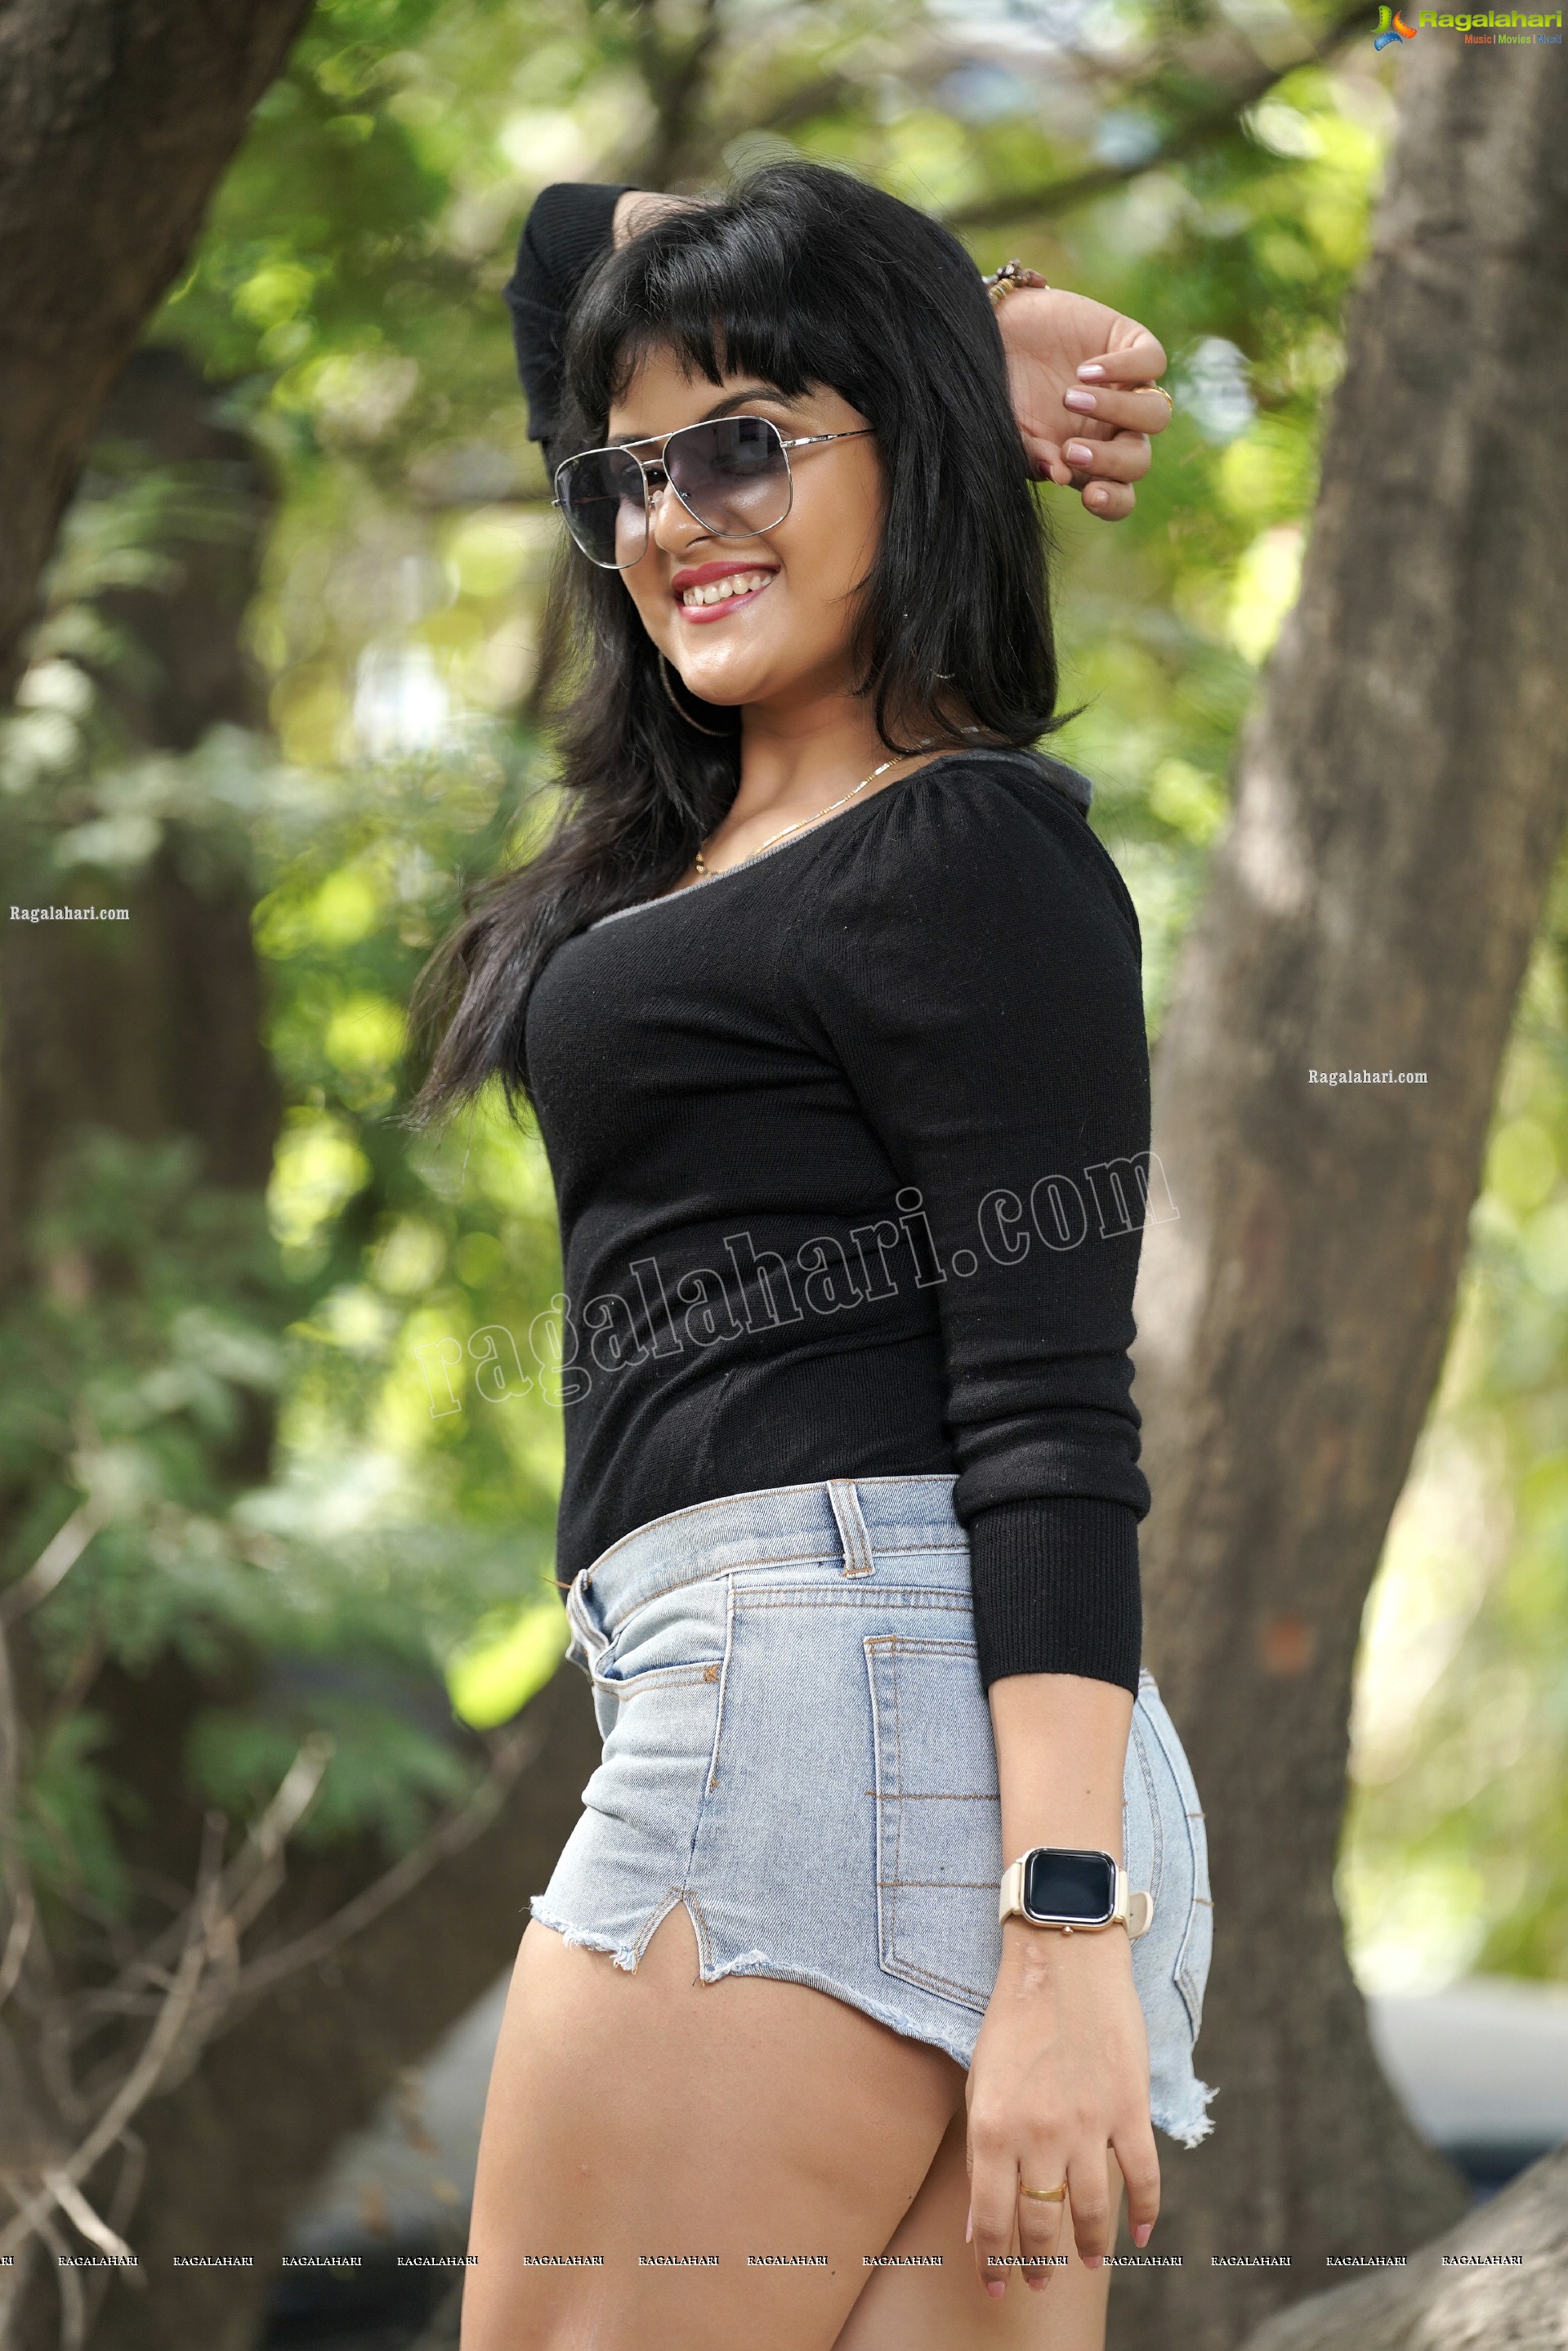 Richa Kalra in Black Top and Denim Shorts, Exclusive Photoshoot